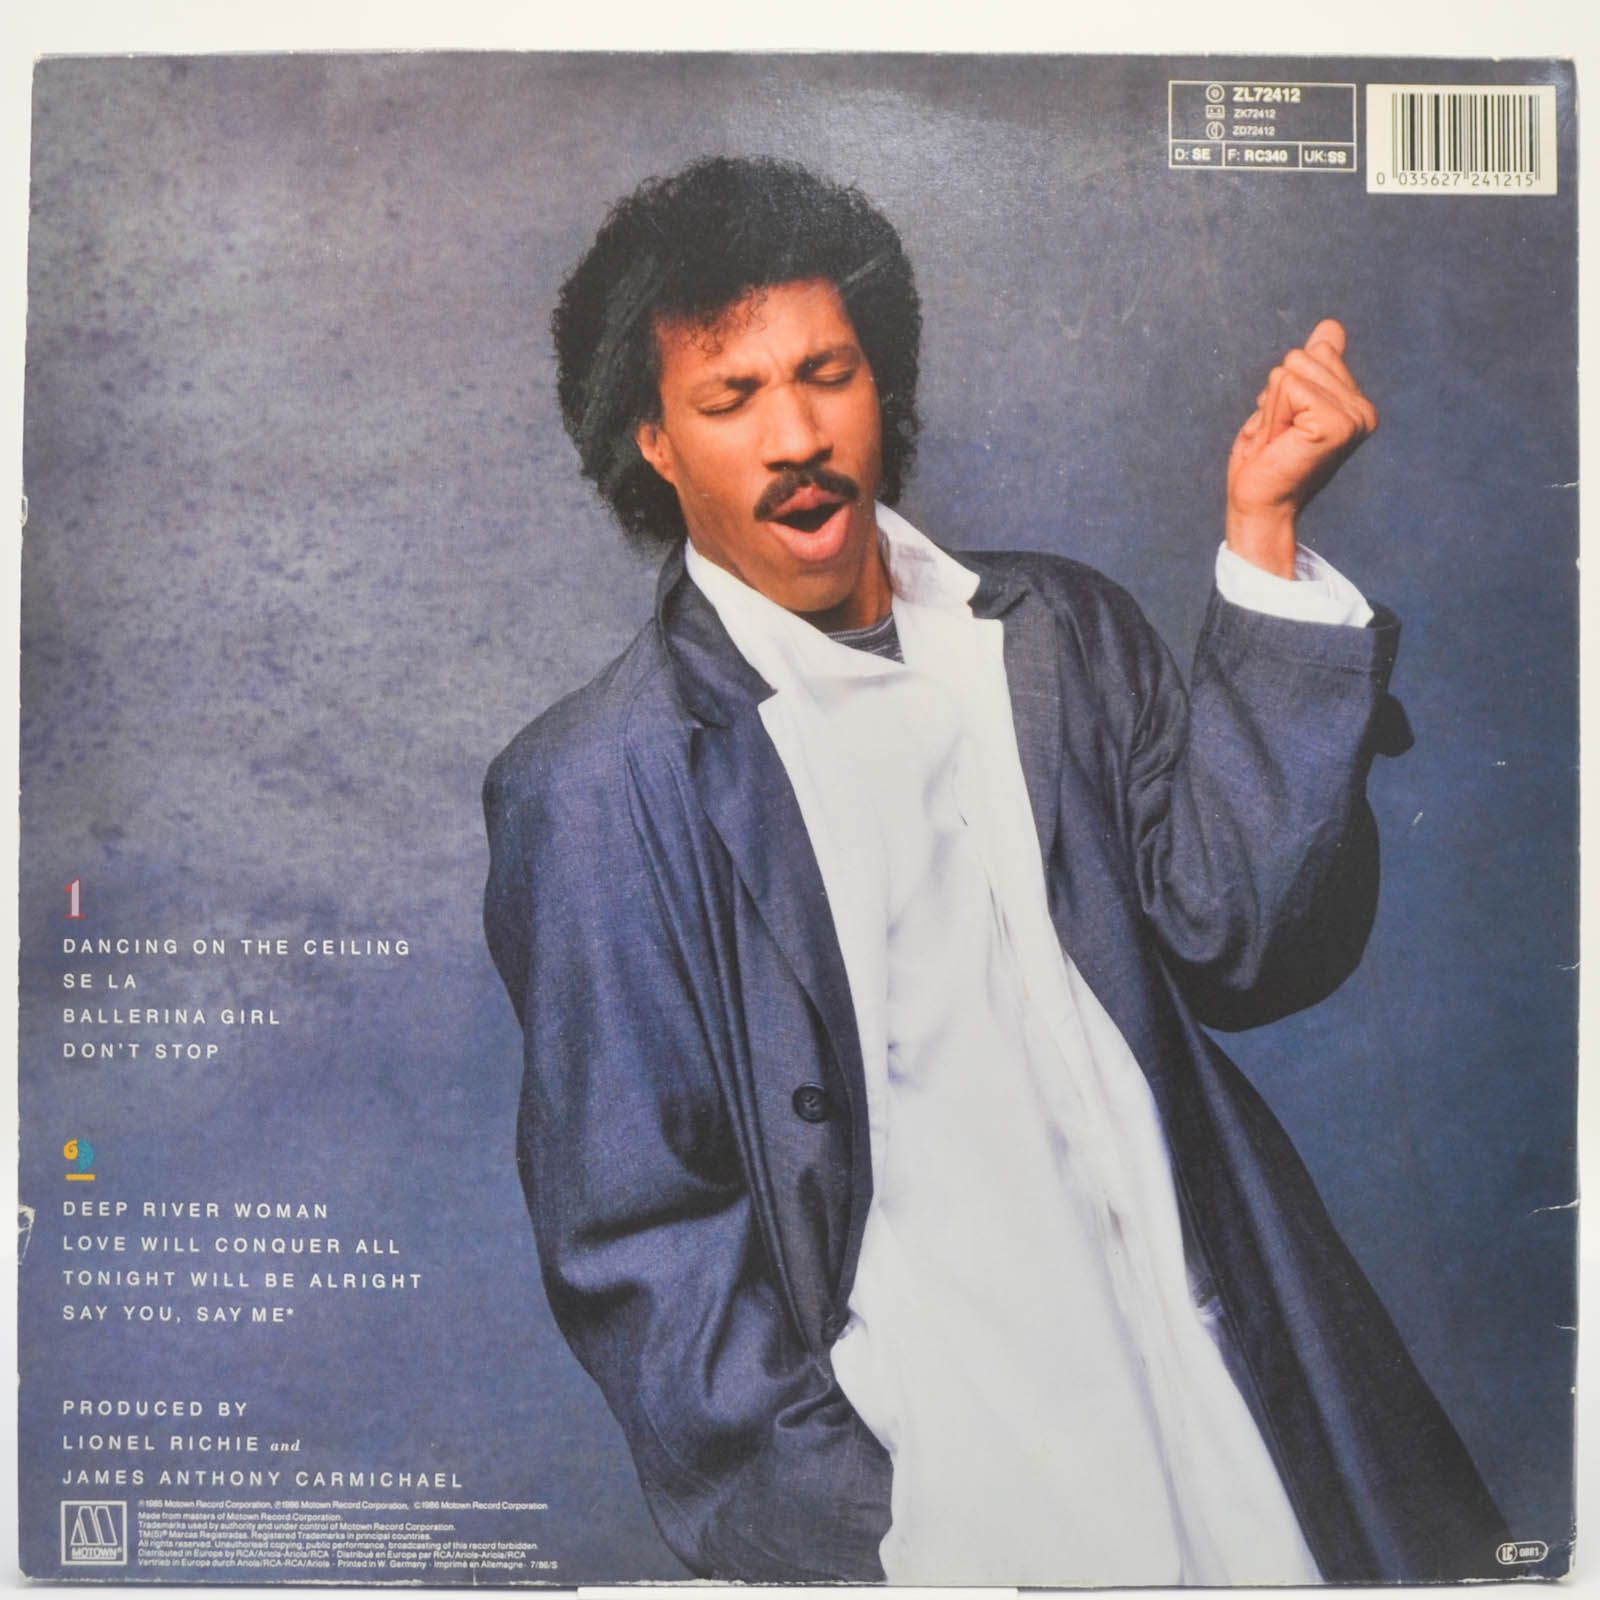 Lionel Richie — Dancing On The Ceiling, 1986